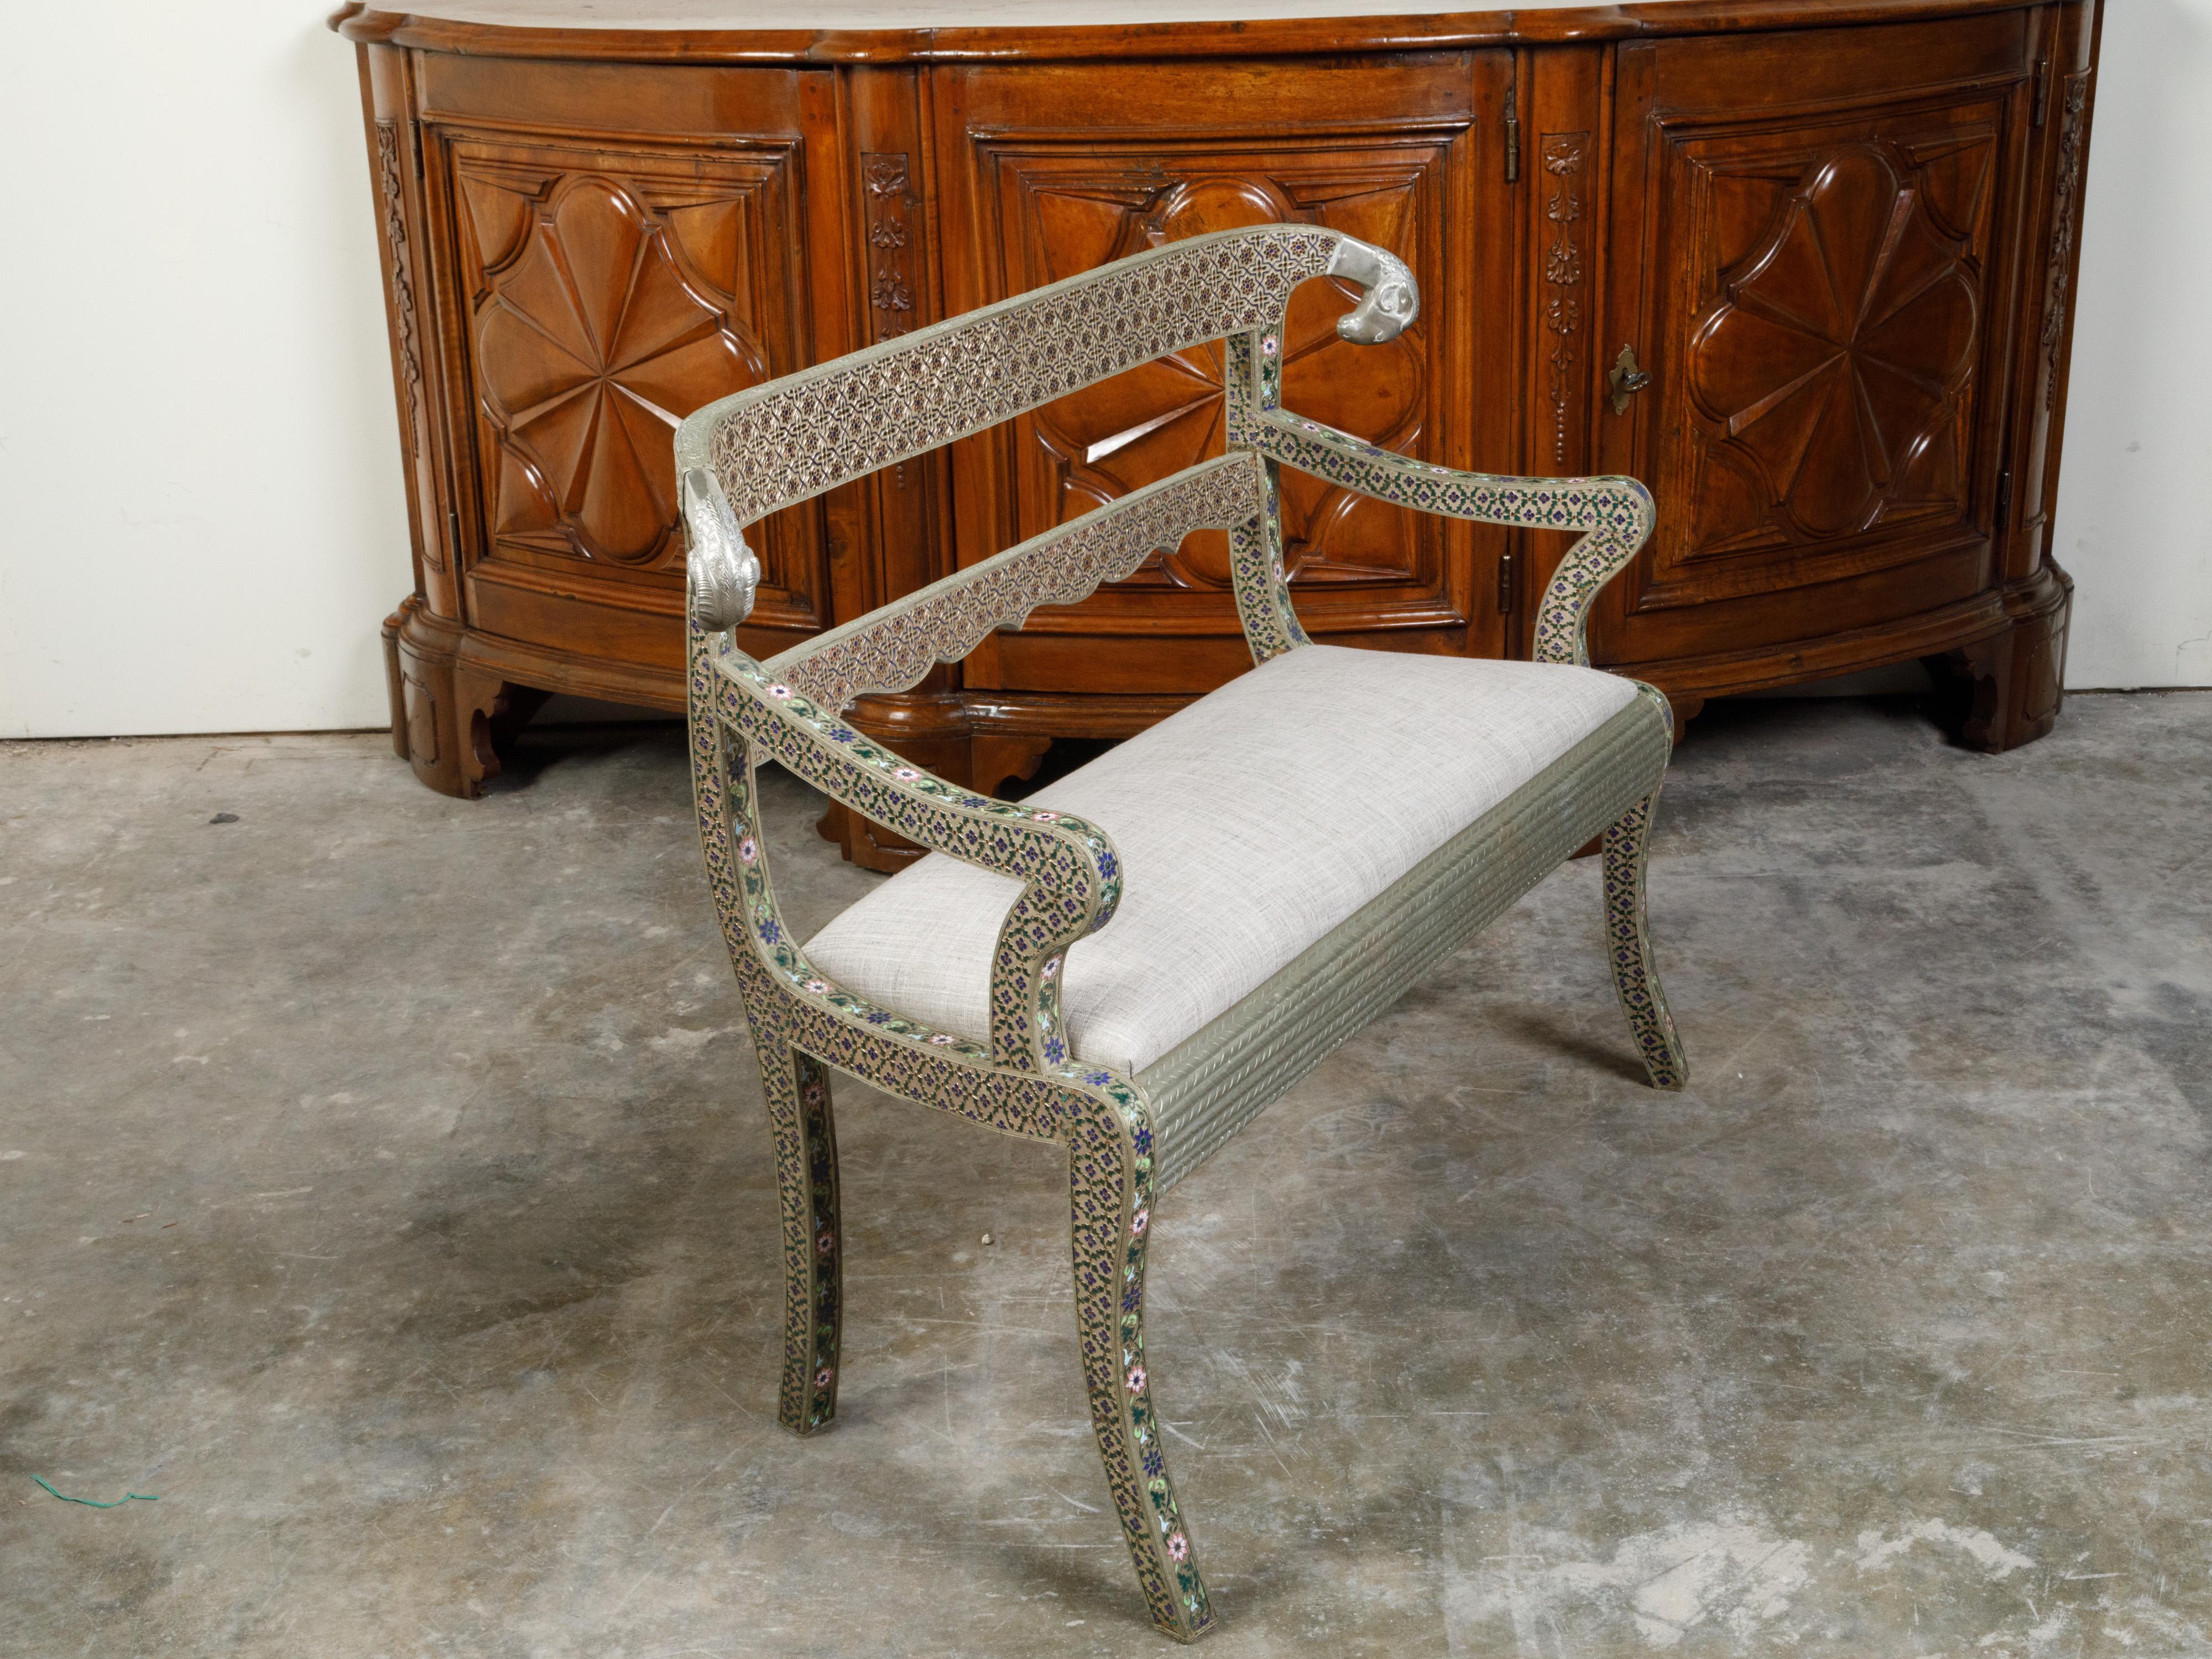 1930s Moroccan Metal Upholstered Settee with Enamel Décor and Rams' Heads For Sale 2